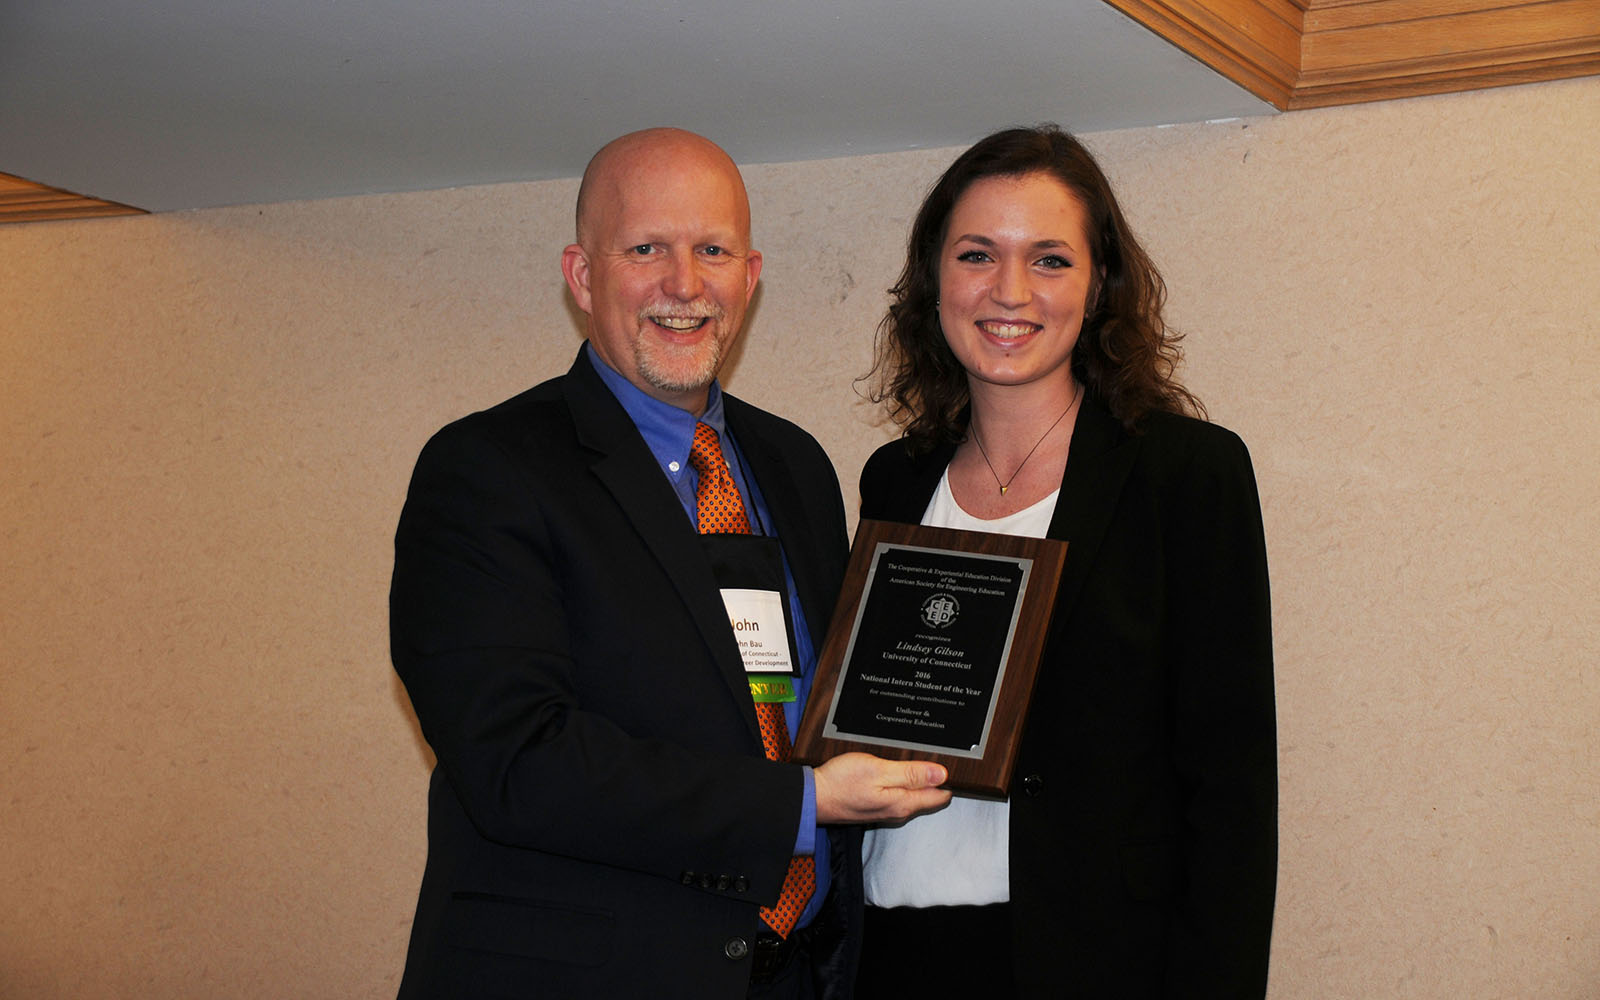 Lindsey Gilson (right) poses with UConn Engineering Career Consultant John Bau at the American Society for Engineering Education Award Ceremony. Bau nominated Gilson for the intern award. (Craig Gunn/ Cooperative and Experiential Education Division of the American Society for Engineering Education.)